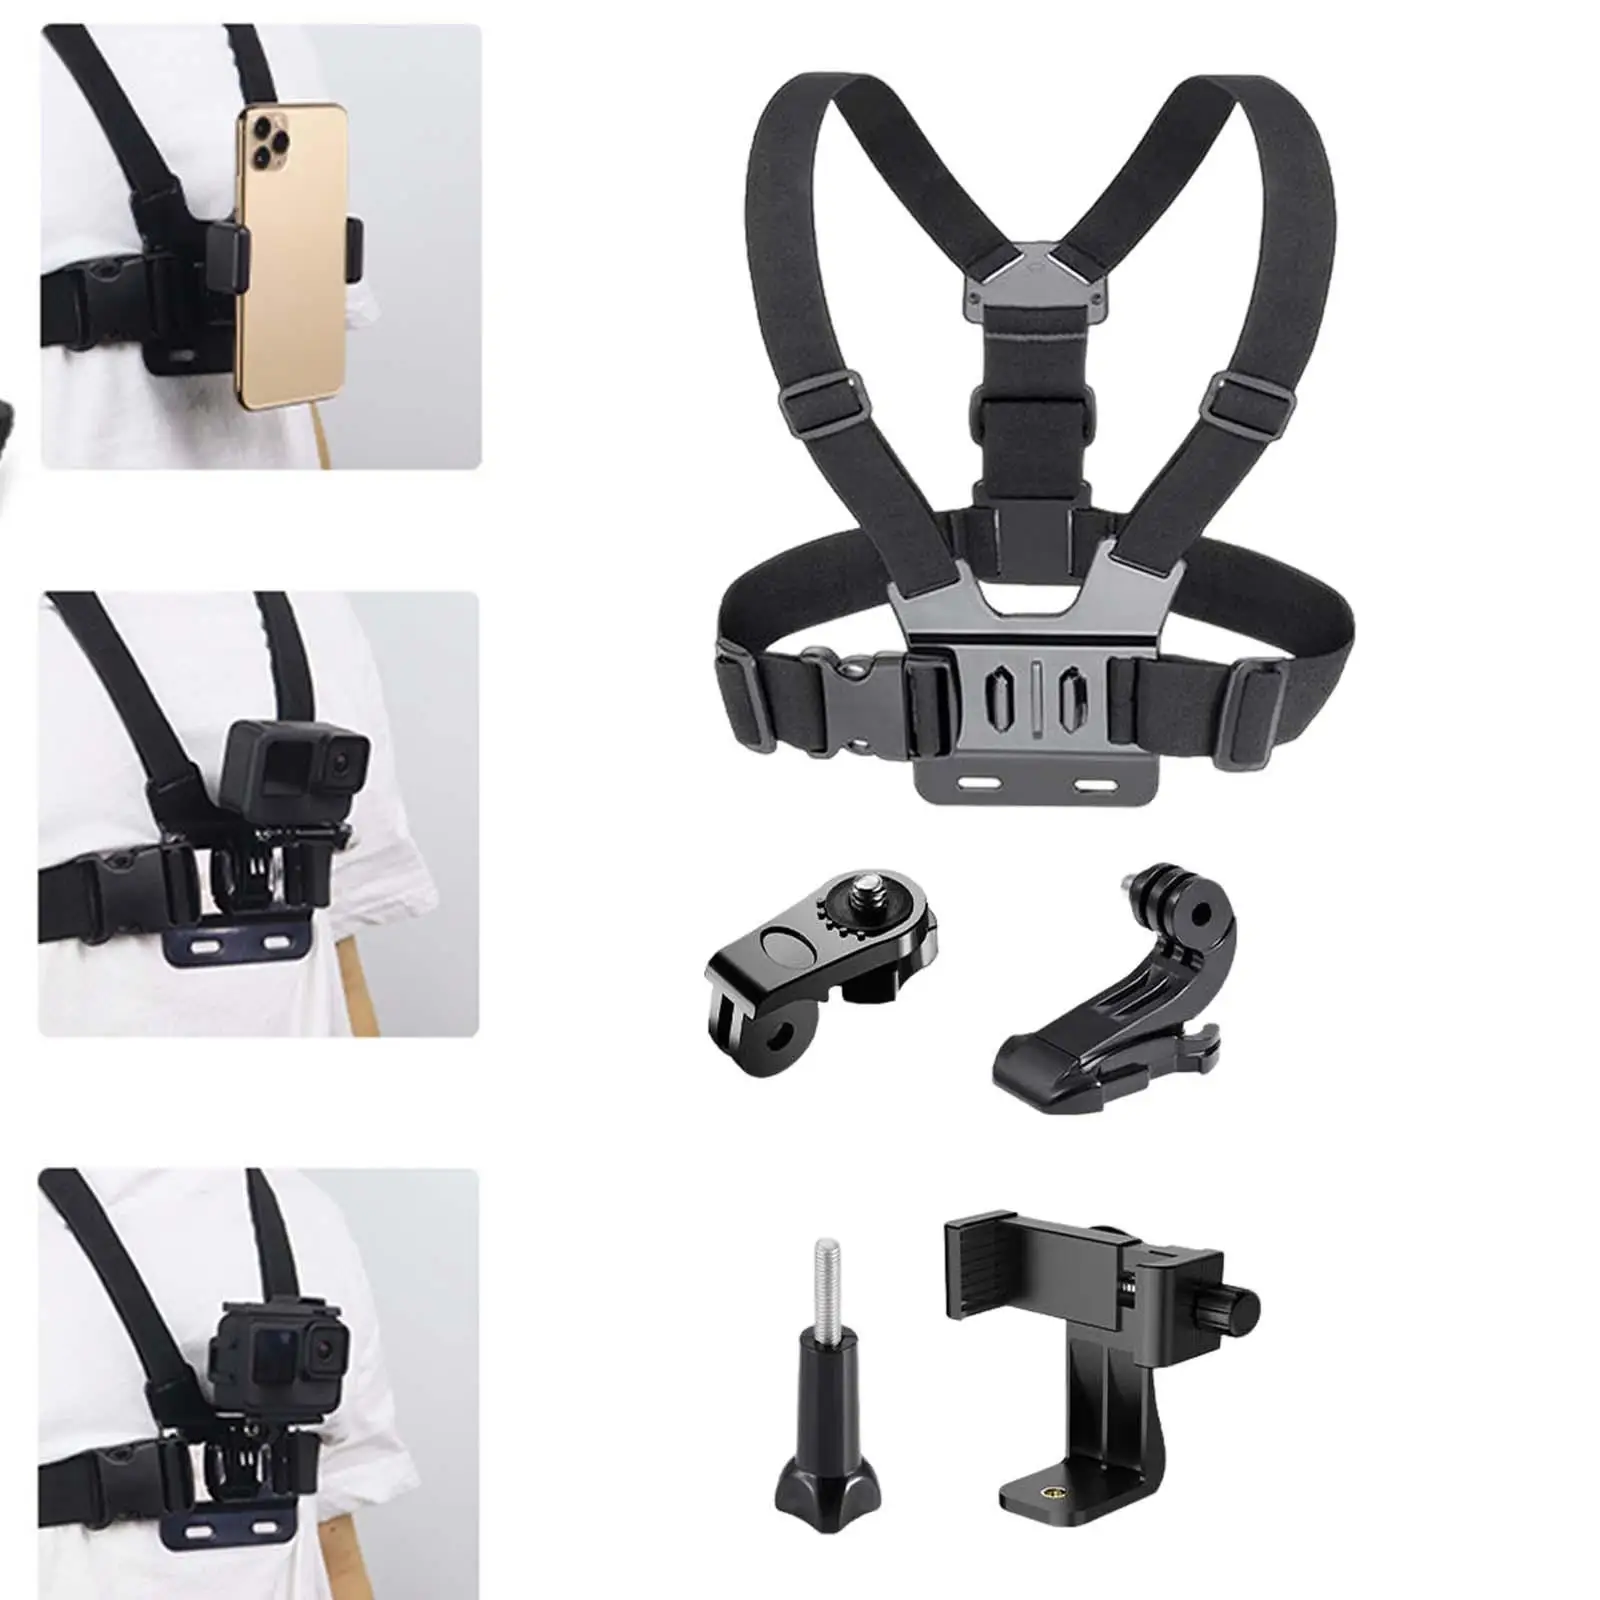 Camera Chest Strap Mount Belt Adjustable Buckle Double Lock Buckle Chest Harness for Outdoor Cycling Mobile Phone Sport Cameras